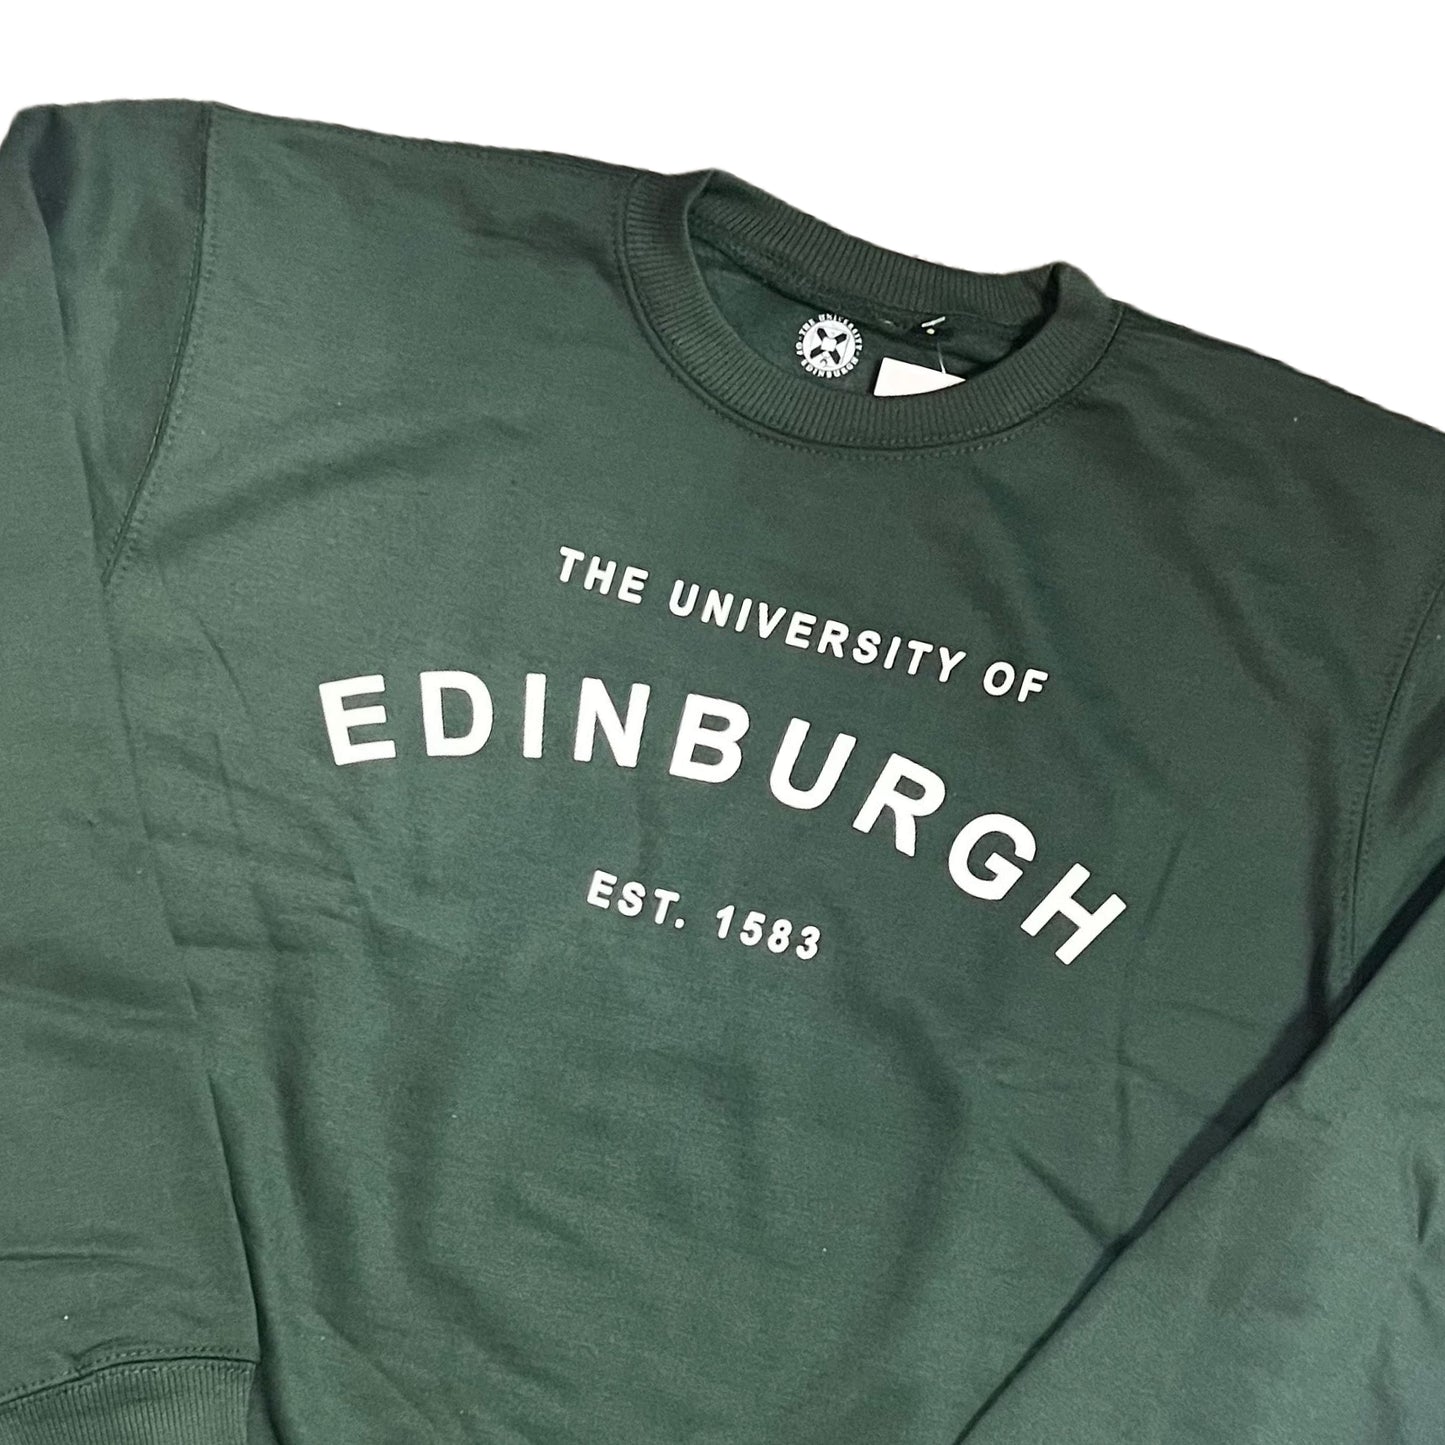 Close-up of text on Bottle Green Sweatshirt.